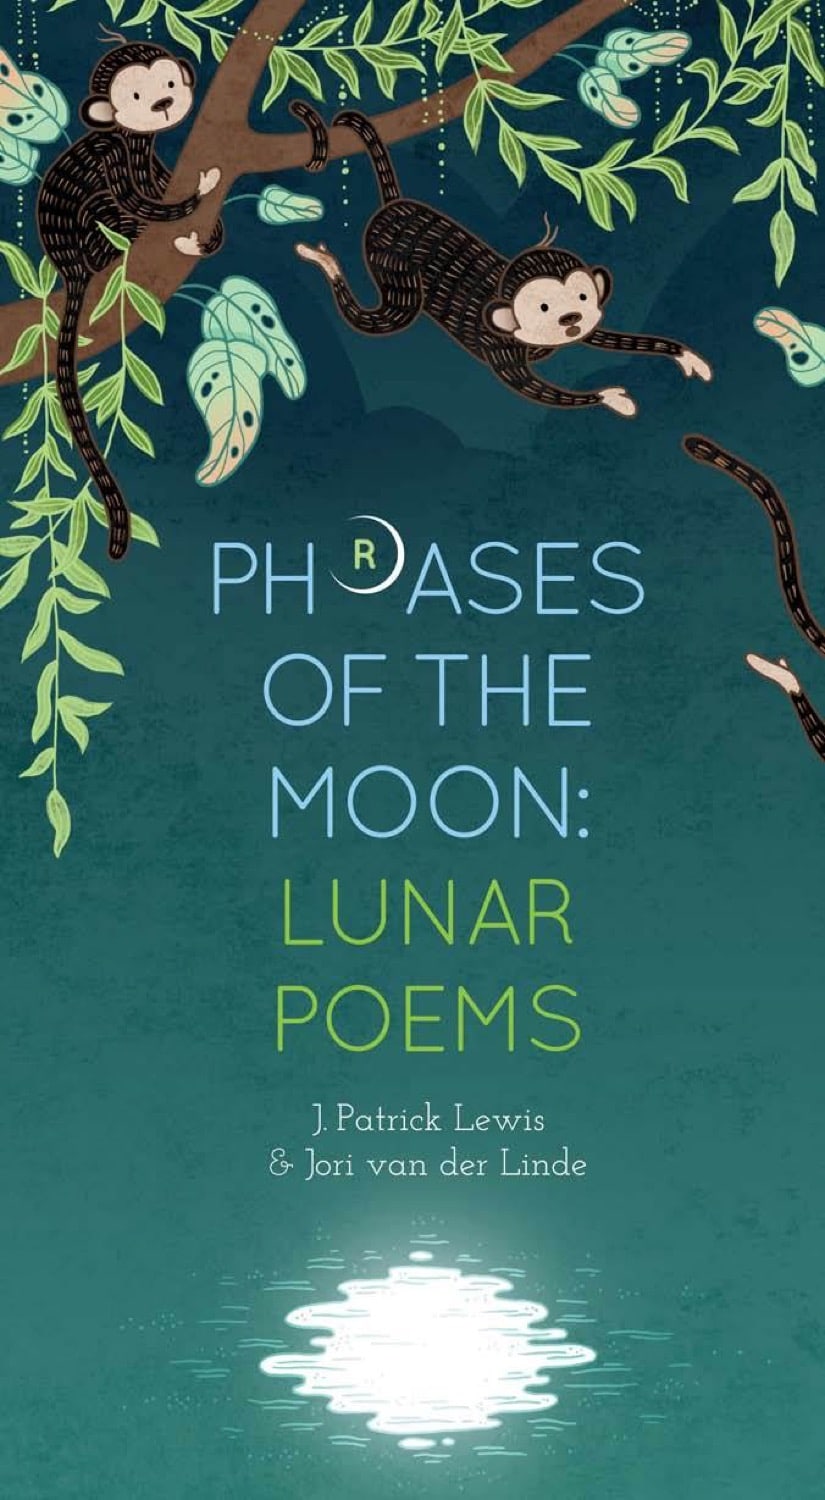 Phrases of the Moon